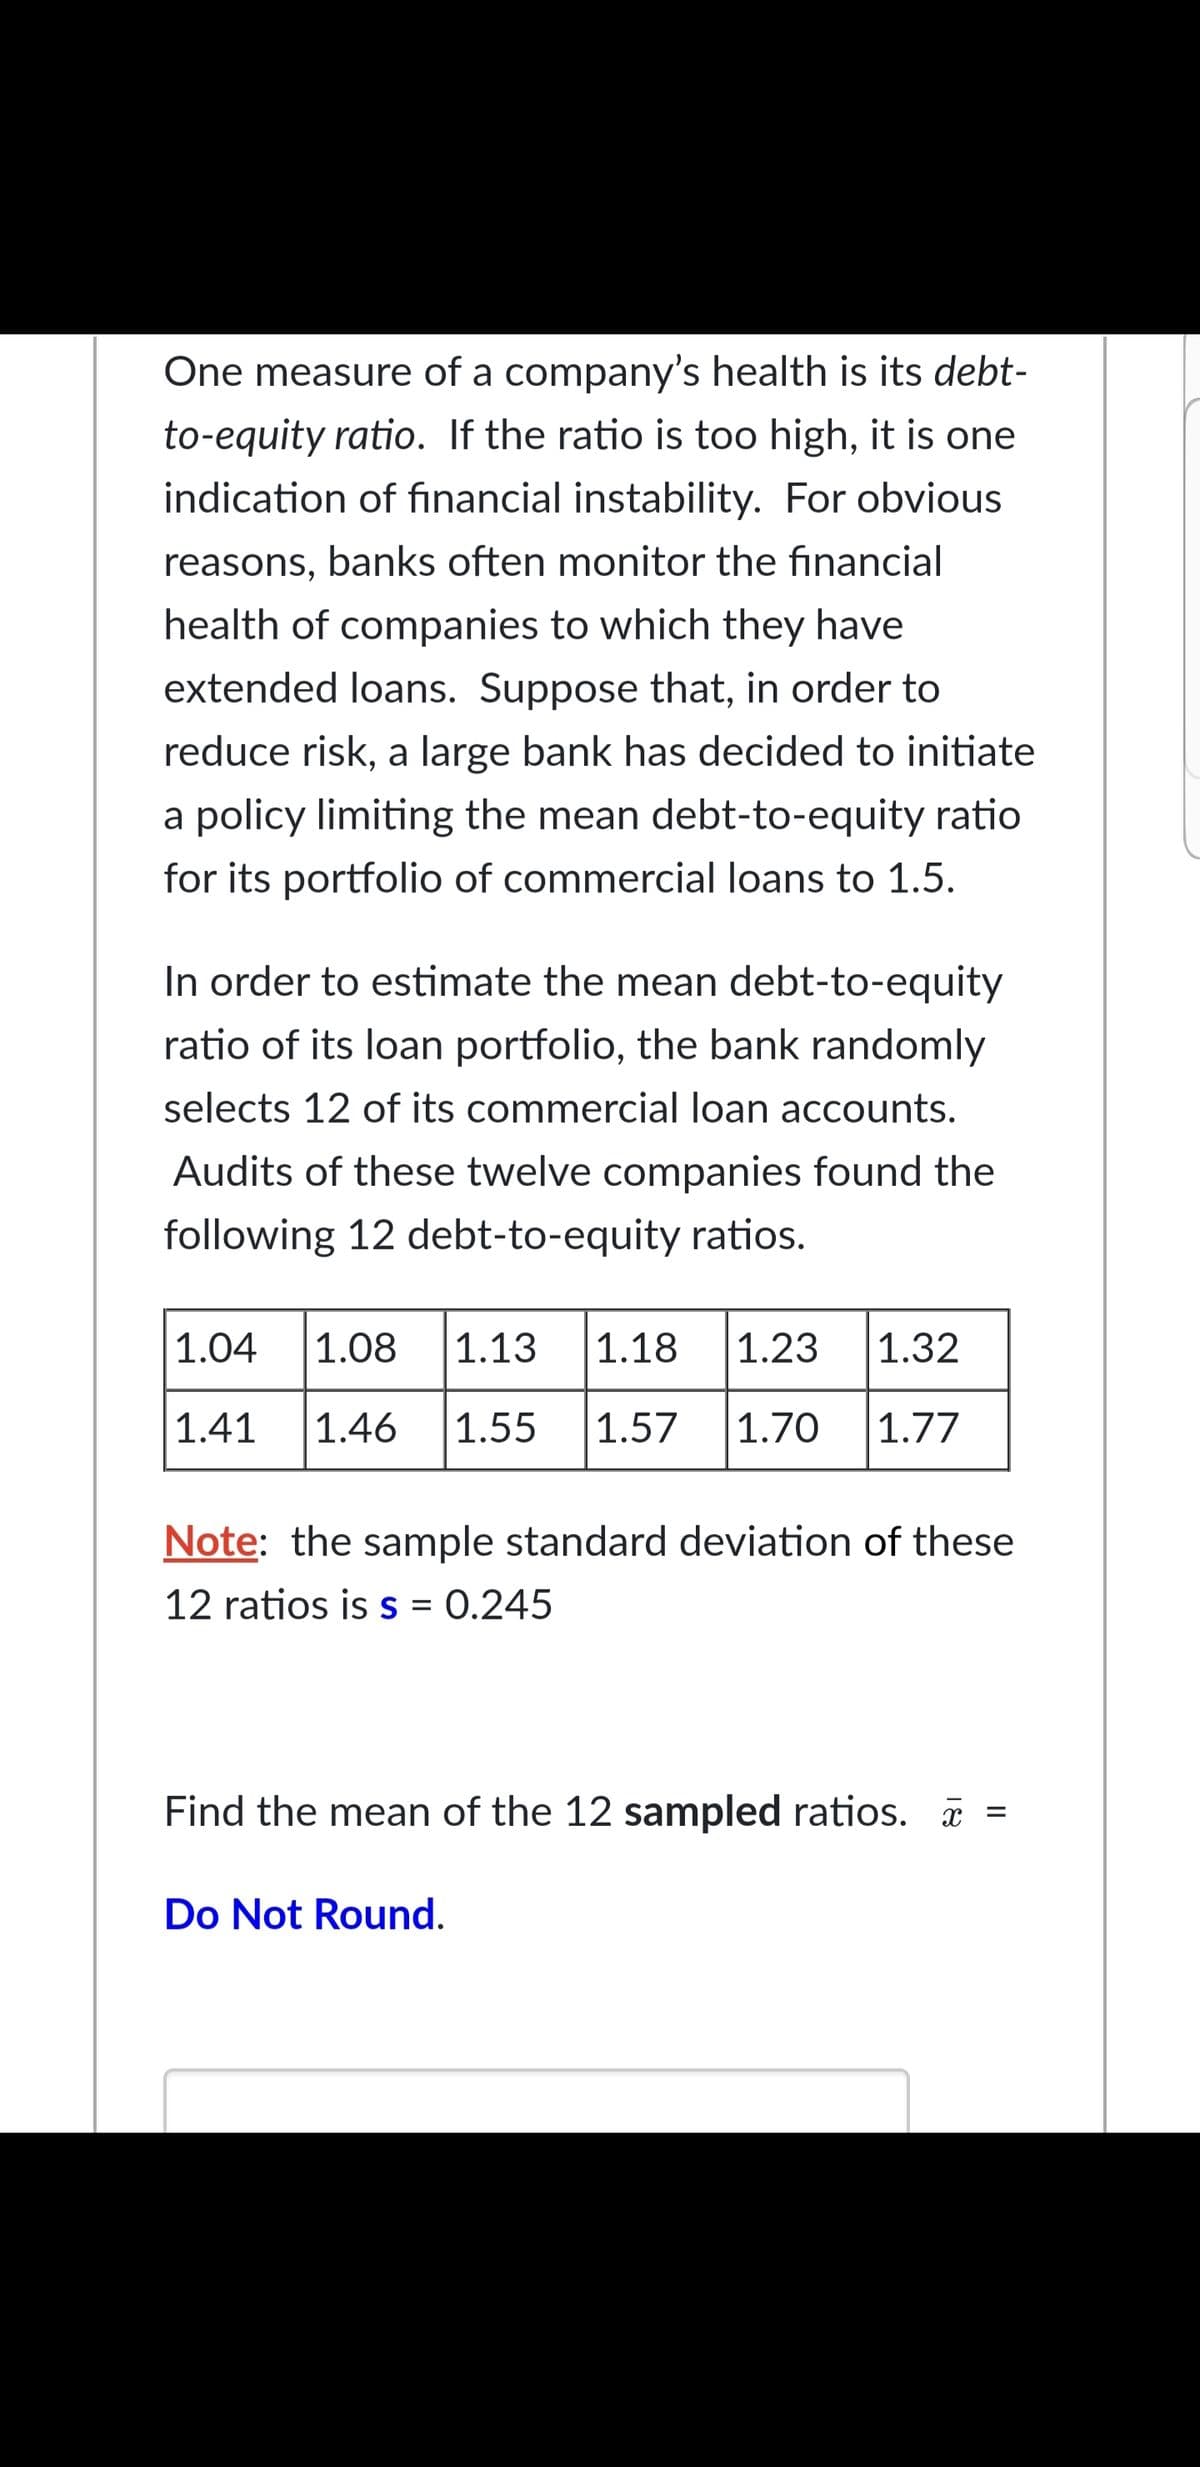 One measure of a company's health is its debt-
to-equity ratio. If the ratio is too high, it is one
indication of financial instability. For obvious
reasons, banks often monitor the financial
health of companies to which they have
extended loans. Suppose that, in order to
reduce risk, a large bank has decided to initiate
a policy limiting the mean debt-to-equity ratio
for its portfolio of commercial loans to 1.5.
In order to estimate the mean debt-to-equity
ratio of its loan portfolio, the bank randomly
selects 12 of its commercial loan accounts.
Audits of these twelve companies found the
following 12 debt-to-equity ratios.
1.04
1.08
|1.13
1.18
1.23
|1.32
1.41
1.46
1.55
1.57
1.70
|1.77
Note: the sample standard deviation of these
12 ratios is s = 0.245
Find the mean of the 12 sampled ratios. =
Do Not Round.
